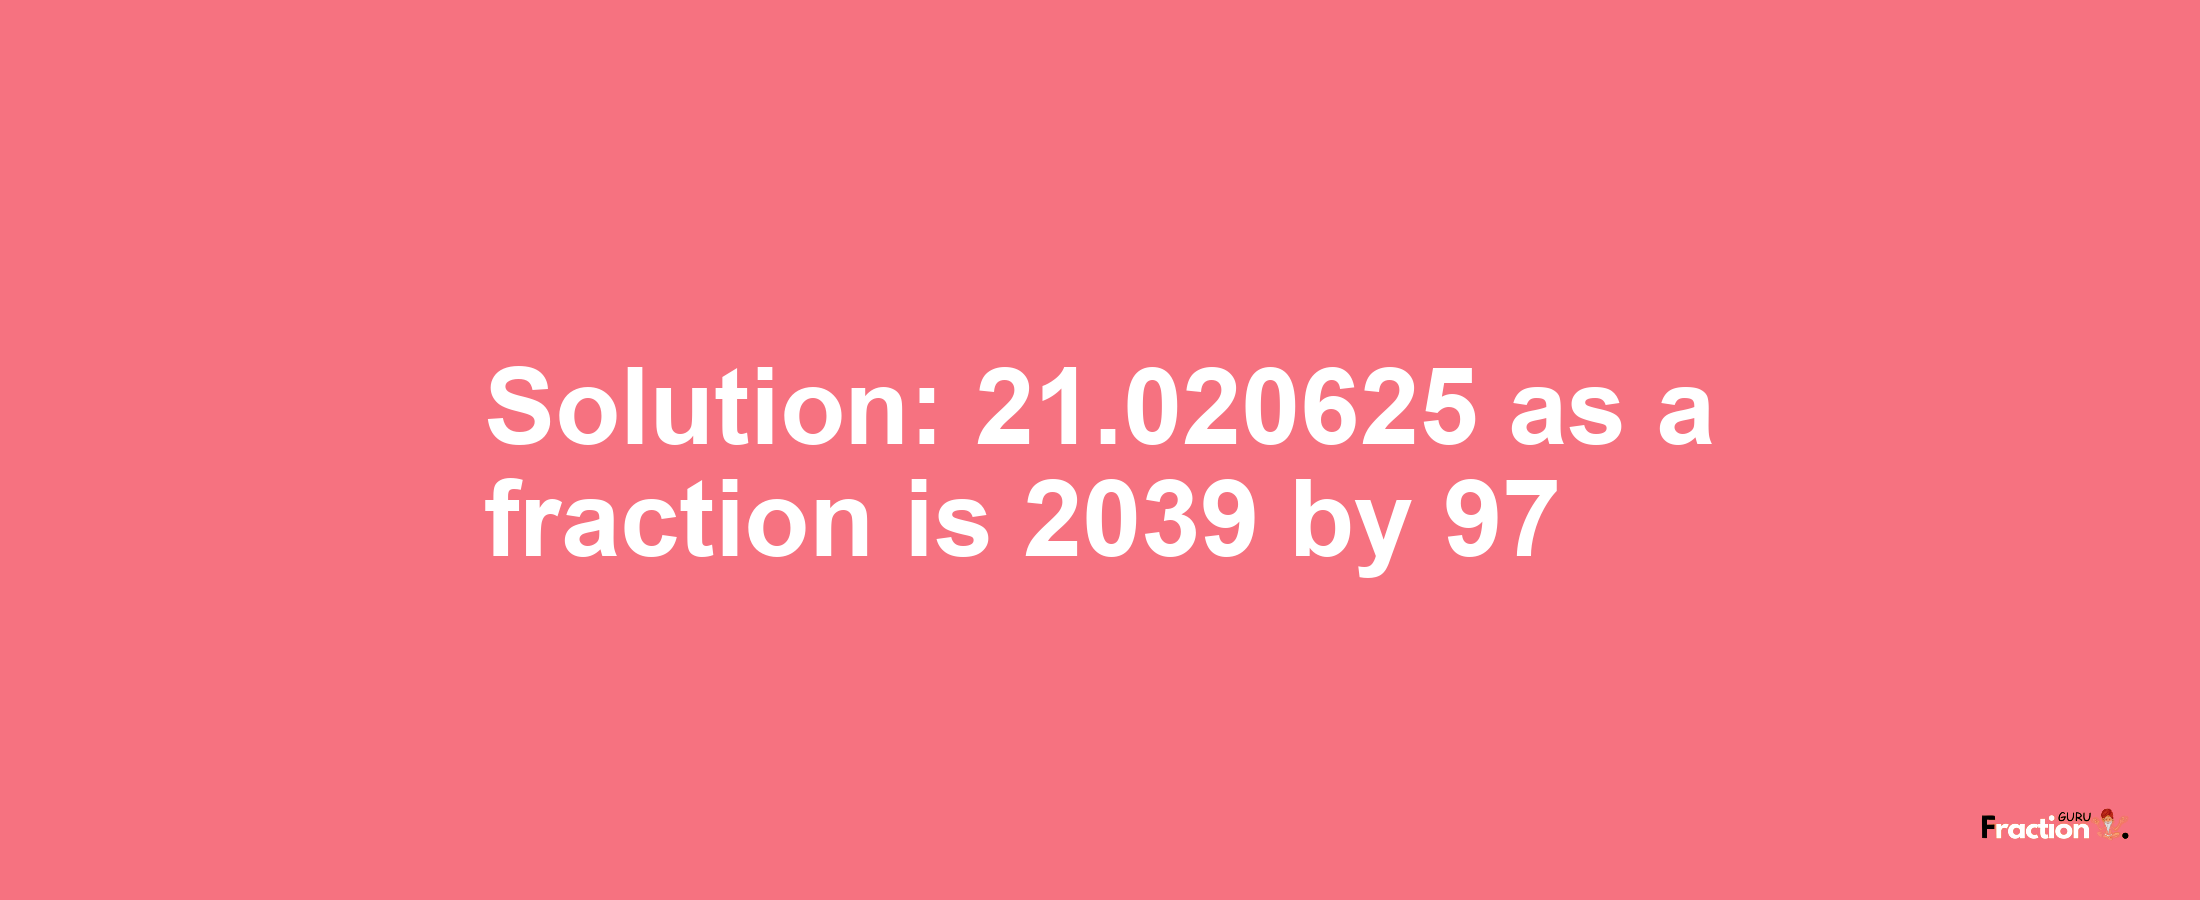 Solution:21.020625 as a fraction is 2039/97